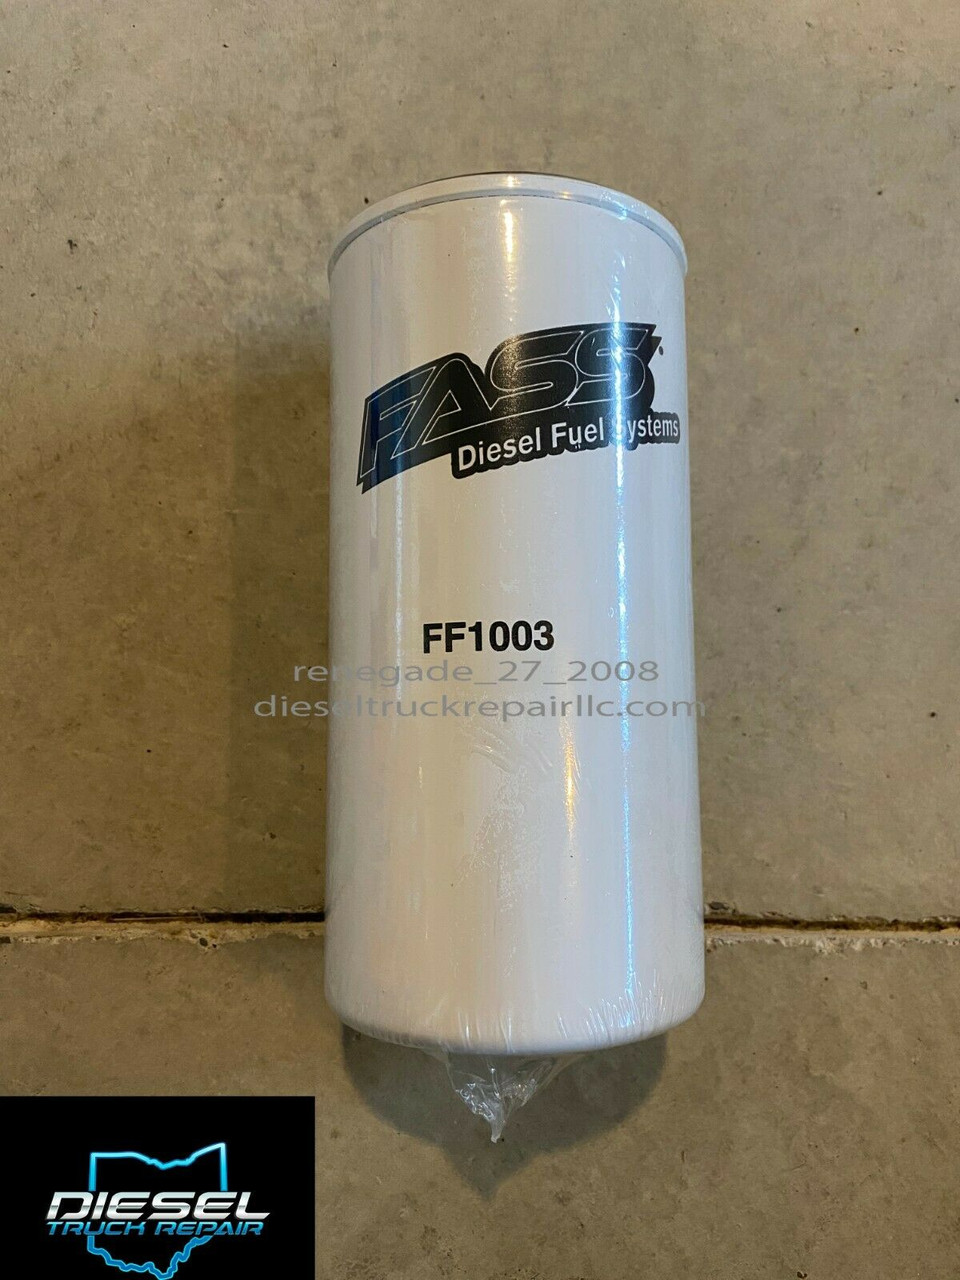 FASS Fuel System FF-1003 HD Series Diesel Fuel Filter Replacement - 3 Micron